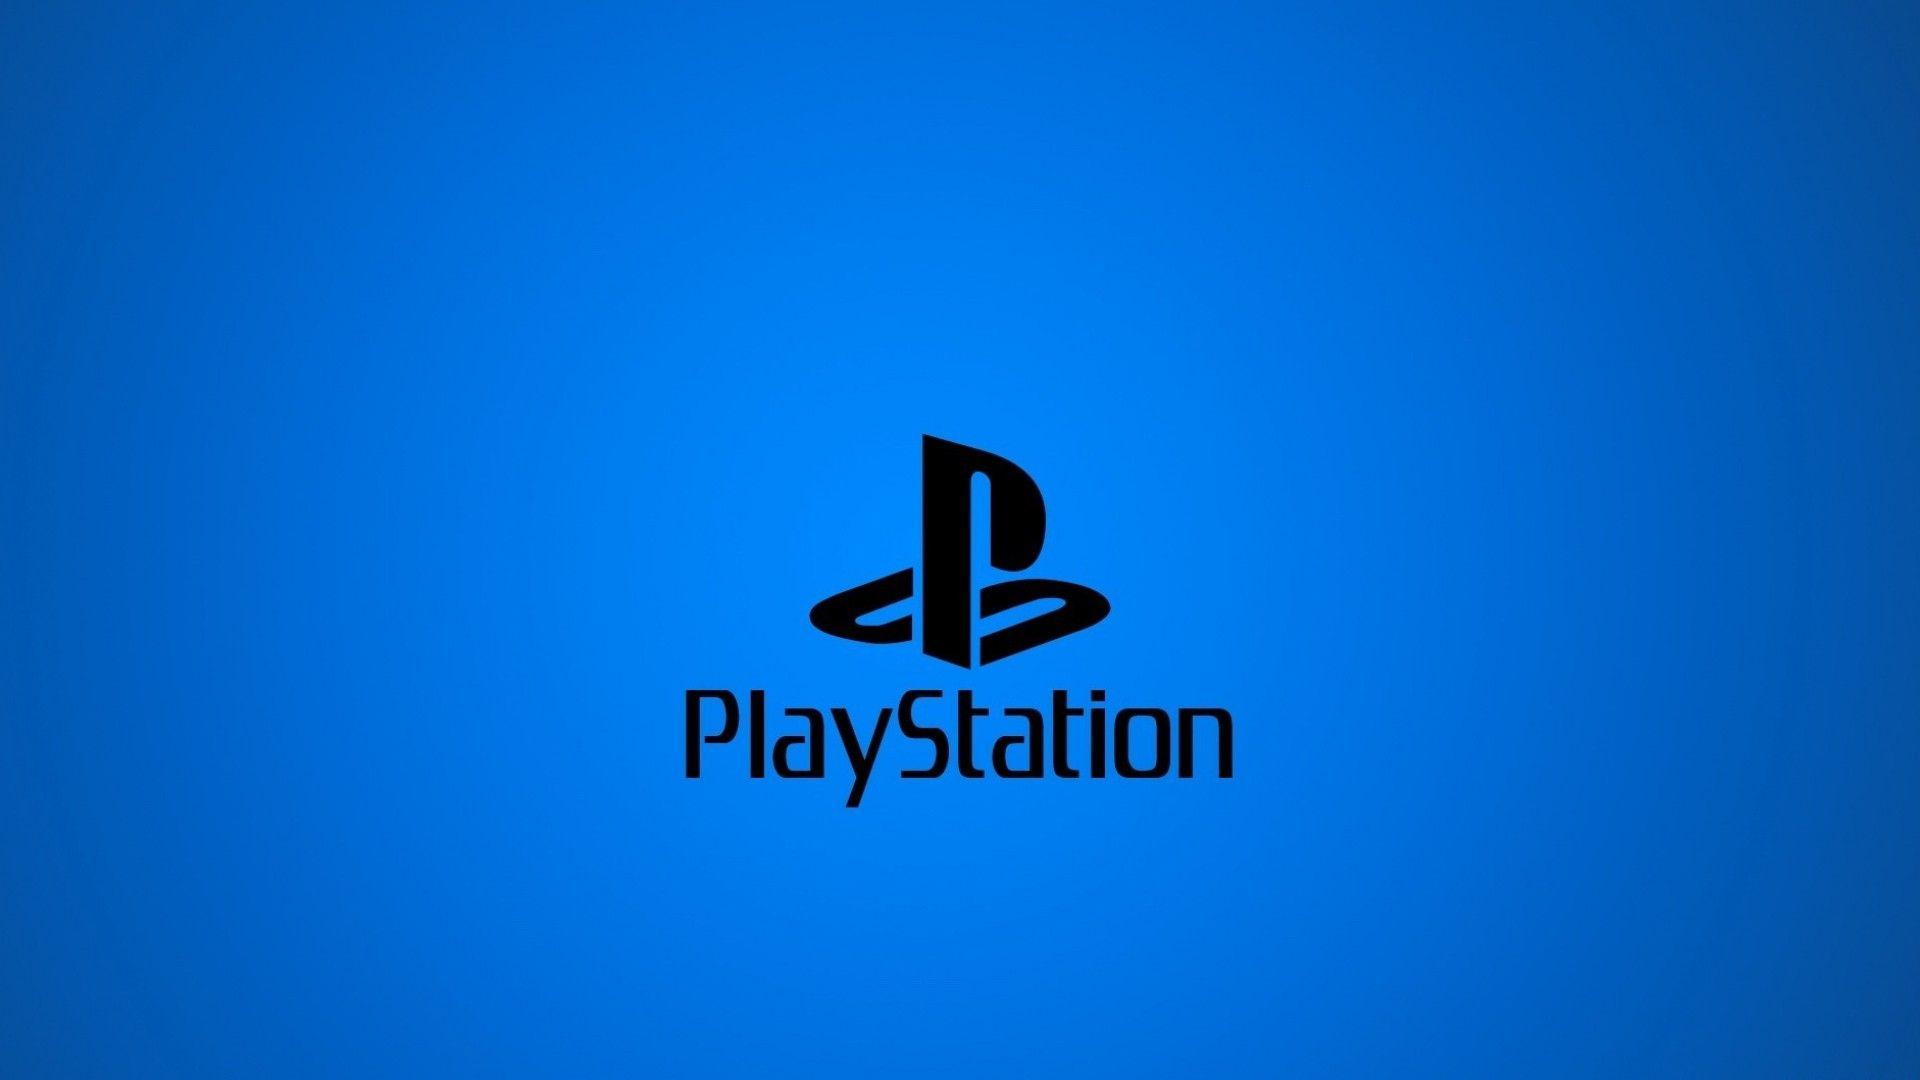 Playstation Wallpaper. Free Wallpaper Download For Android